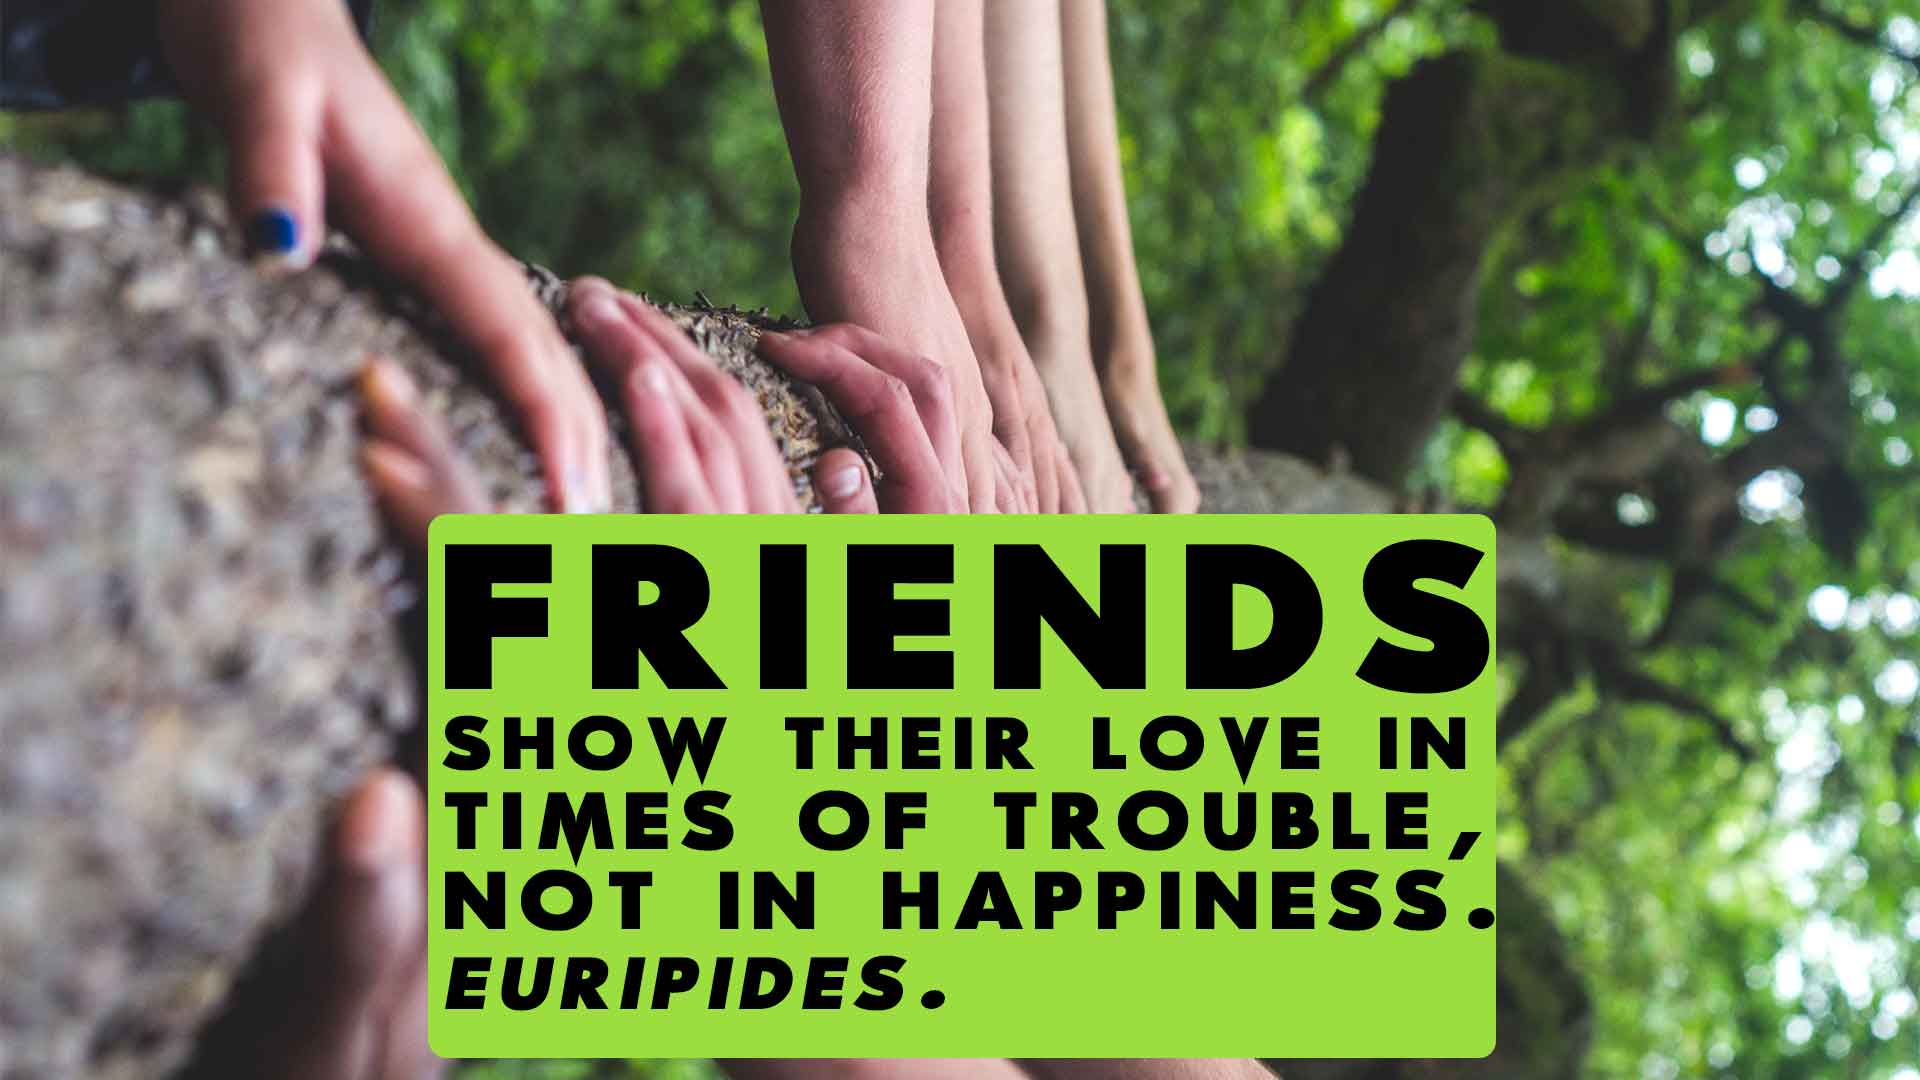 Friends-show-their-love-in-times-of-trouble-not-in-happiness.-Euripide